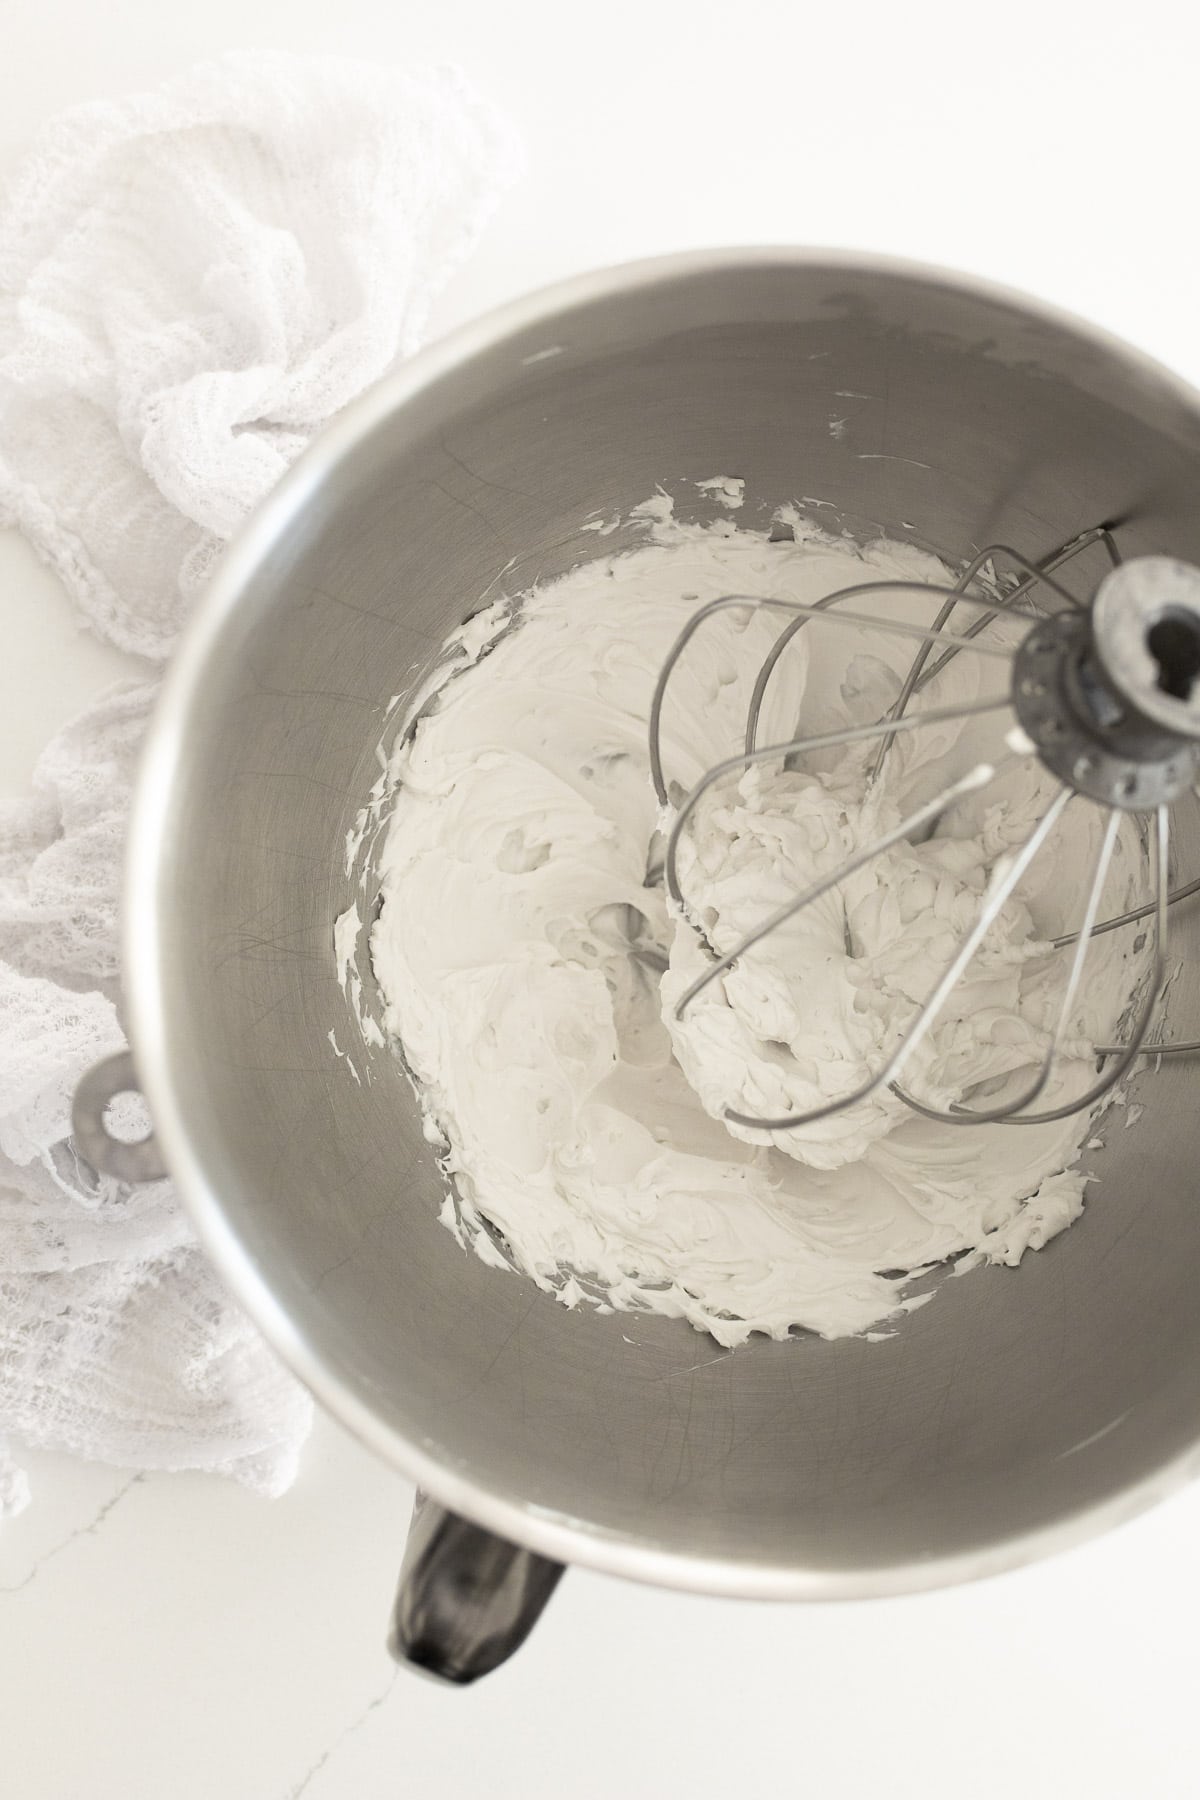 Whipped coconut cream in the bowl of a stand mixer.